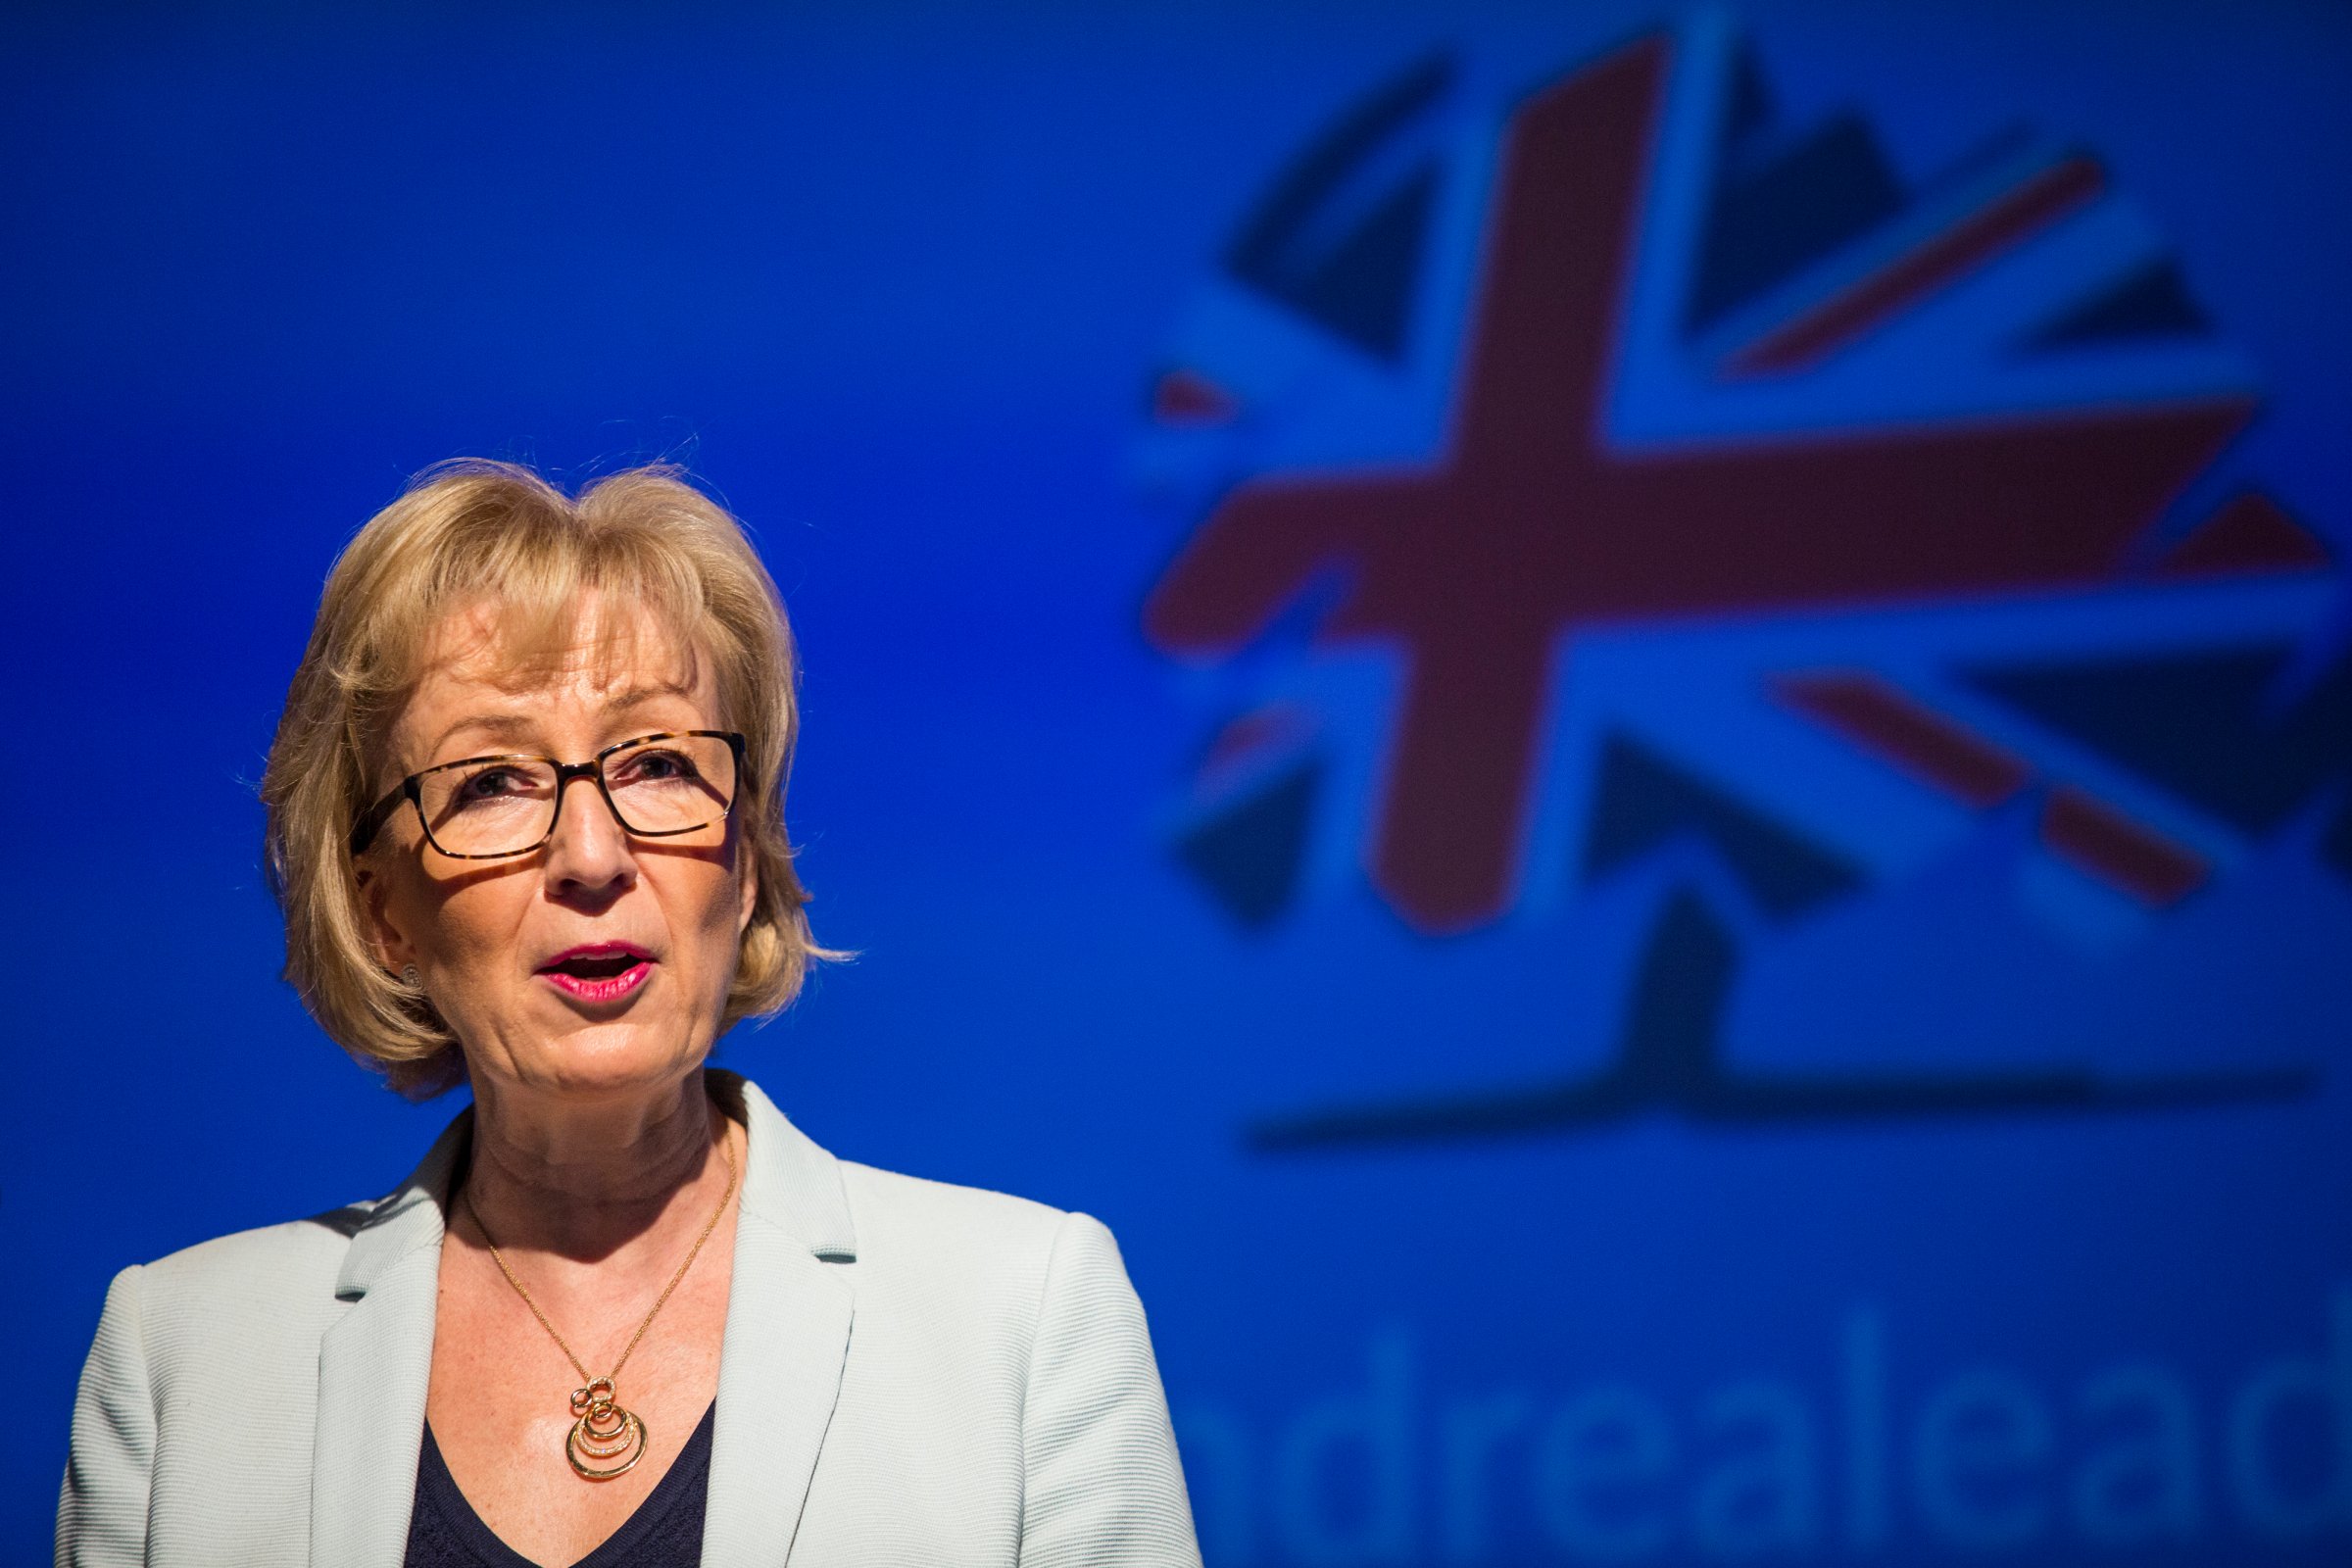 Andrea Leadsom, British Energy Secretary and Conservative Party leadership contender, speaks at a campaign rally on July 7, 2016 in London, England.